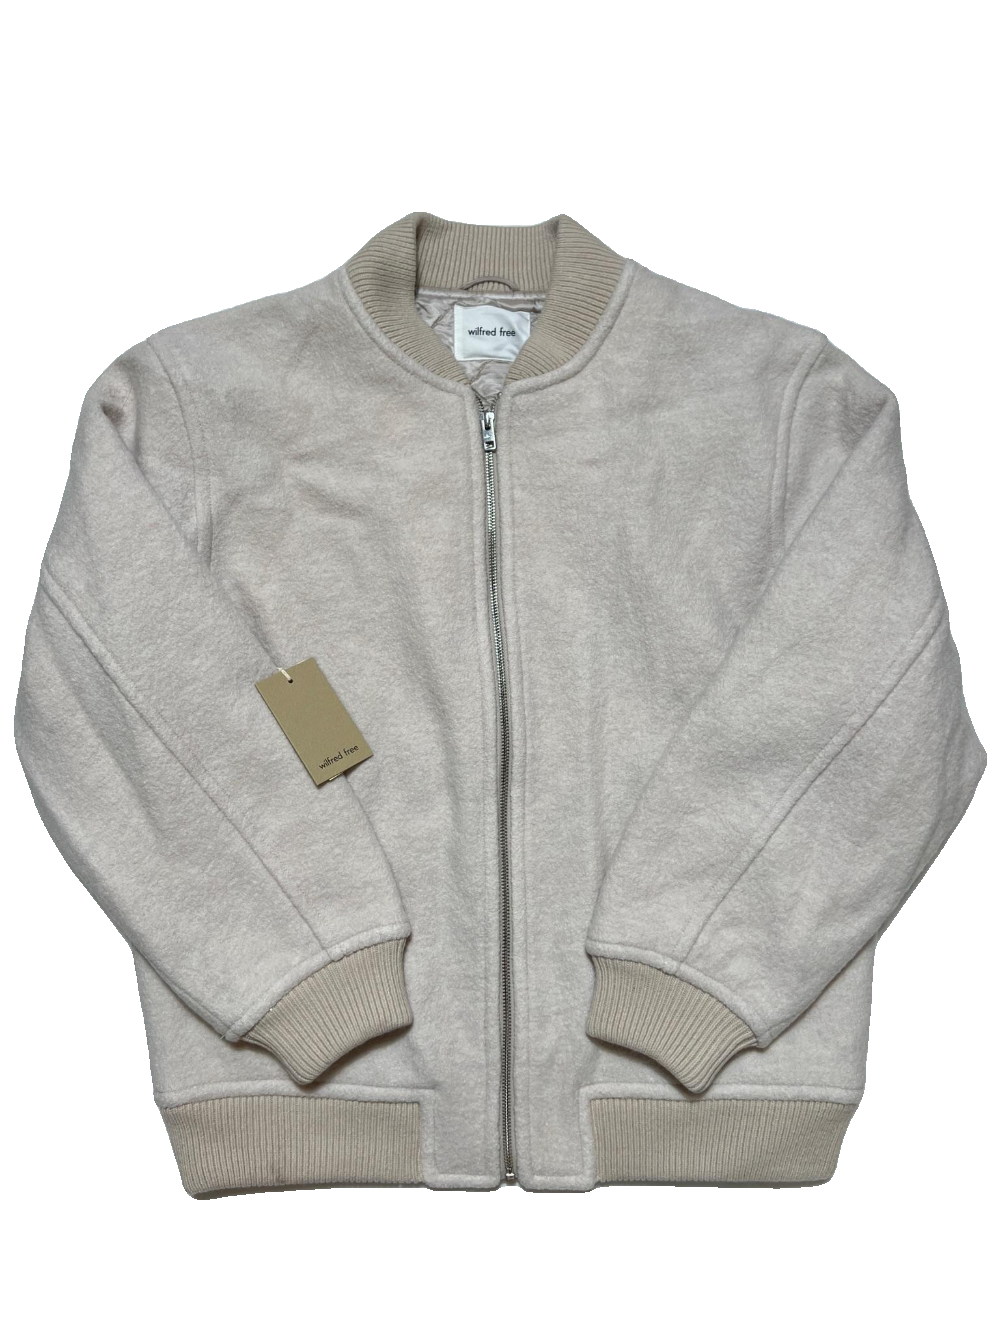 Wilfred Free- Beige "Stable" Zip Up Jacket NEW WITH TAGS!